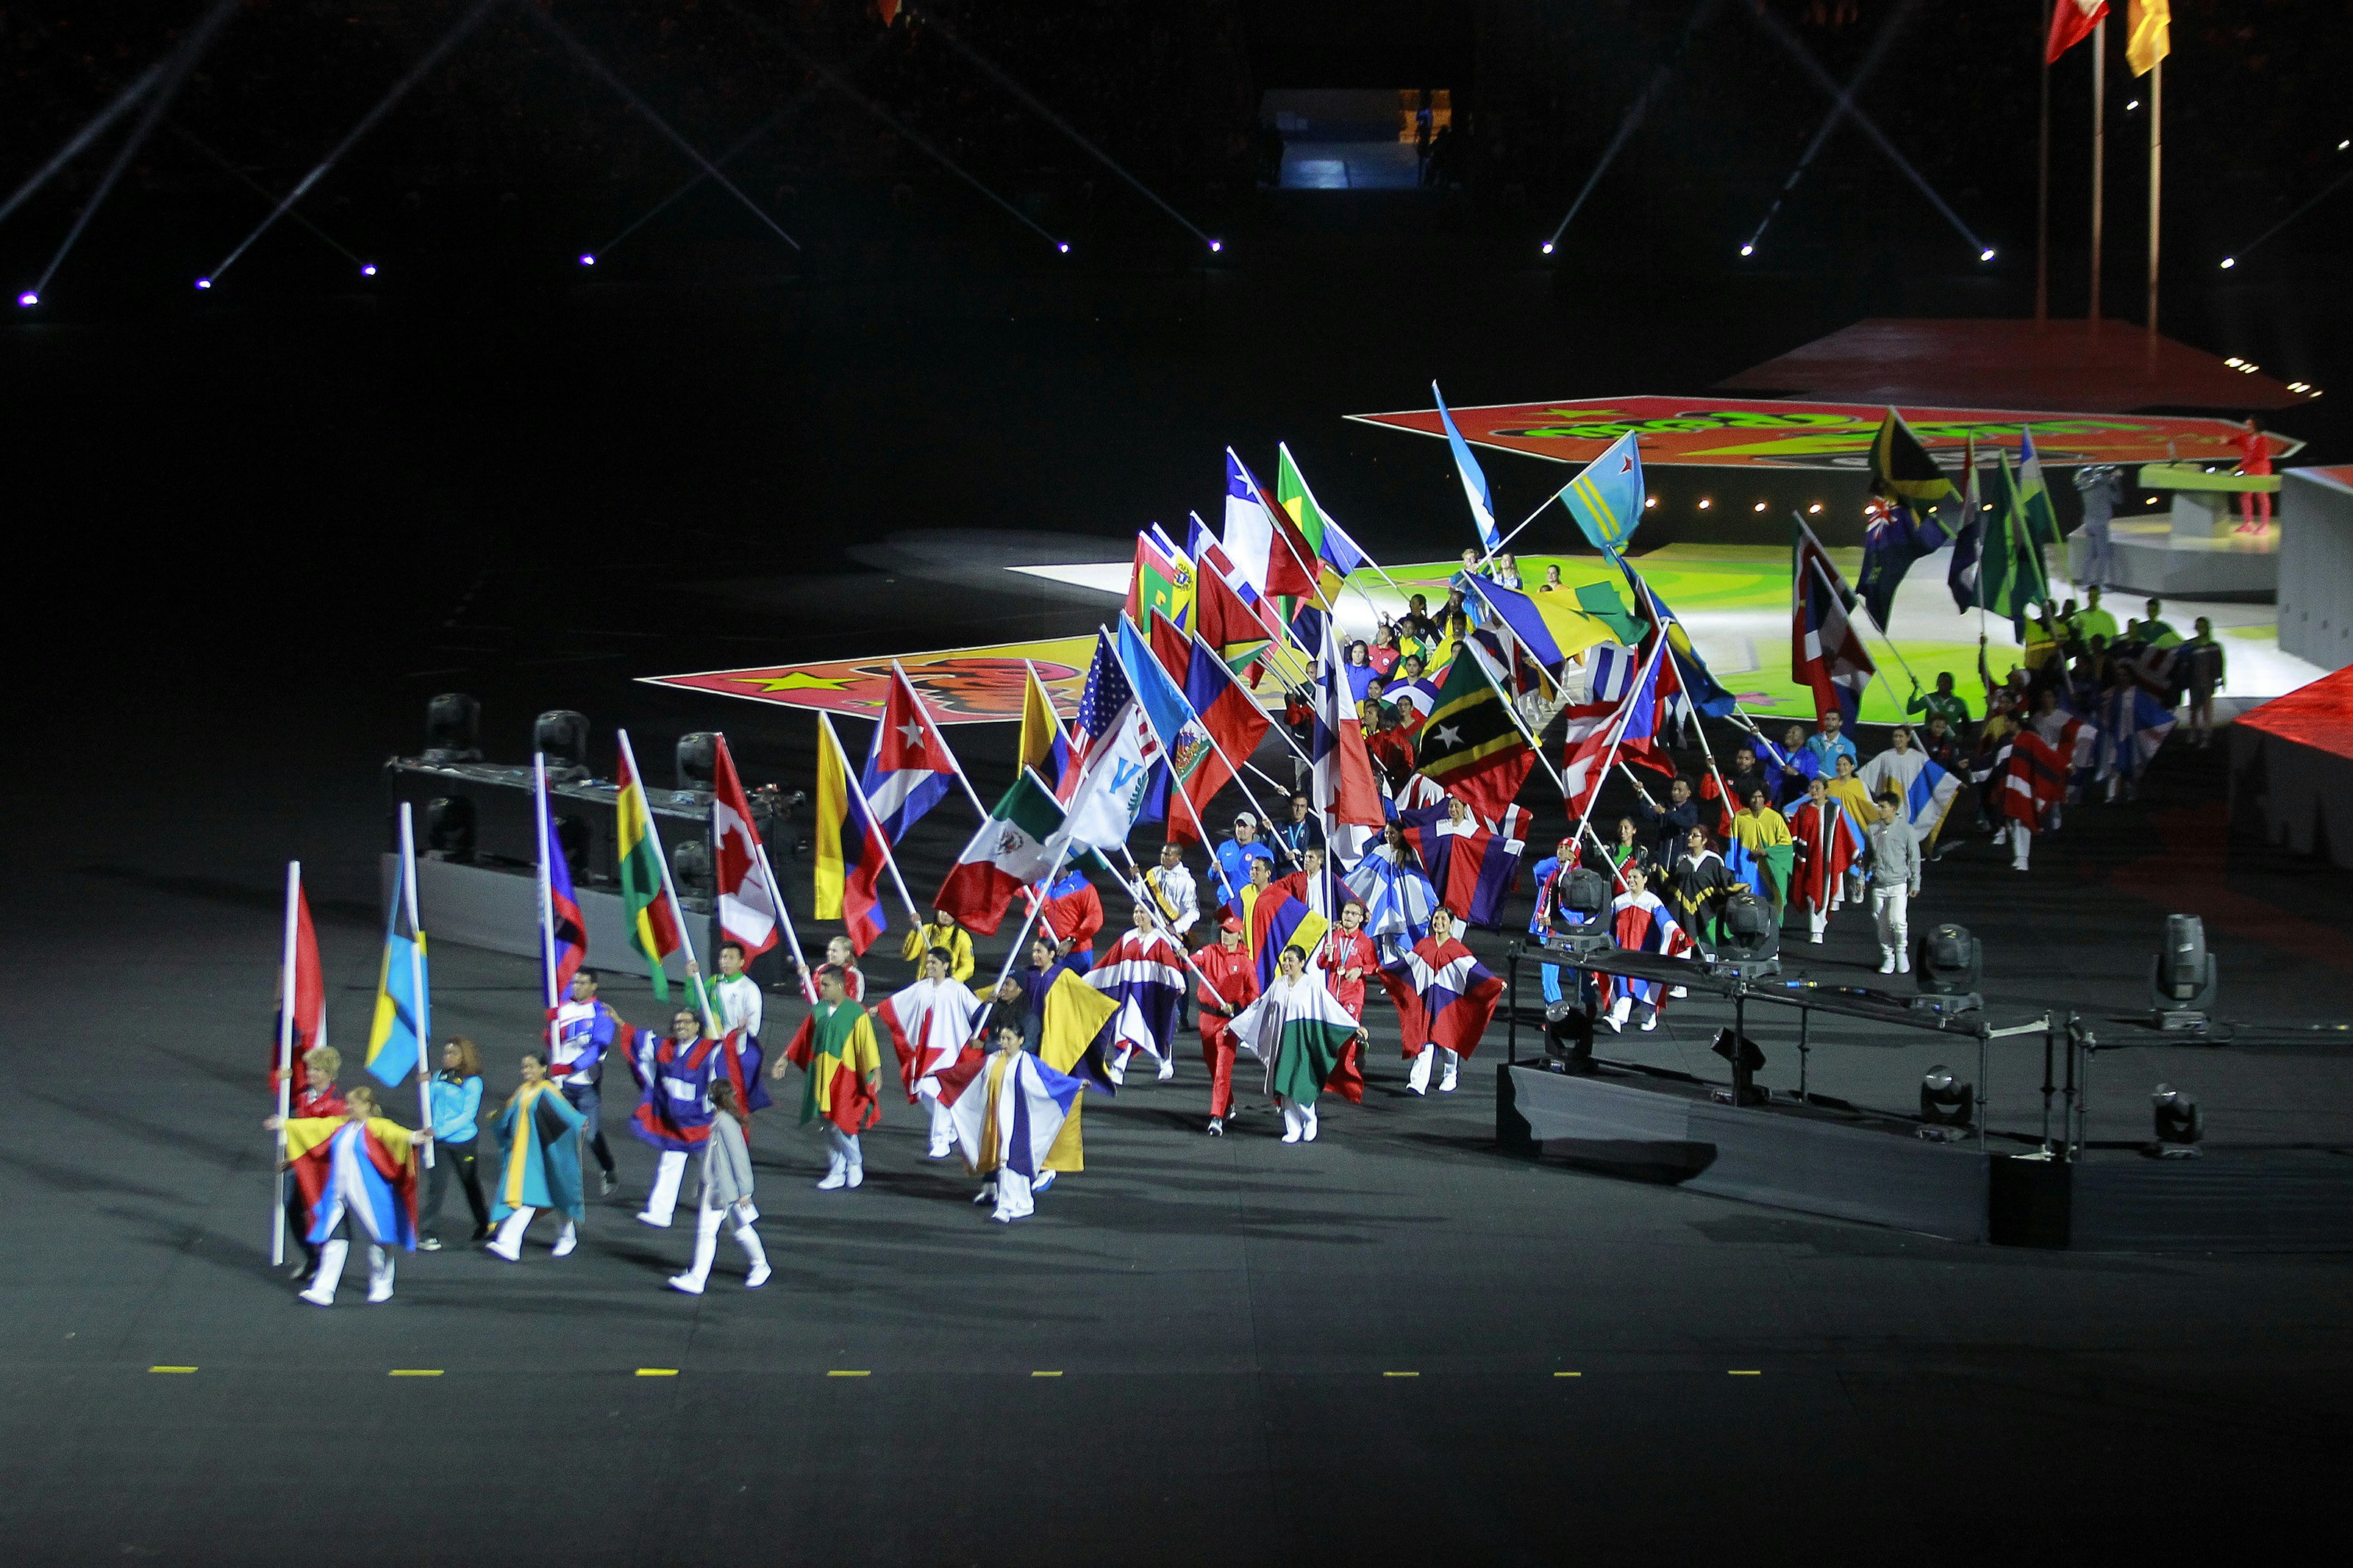 A group of people dressed in and holding national flags walk across a stage during the 2019 Pan American Games in Lima